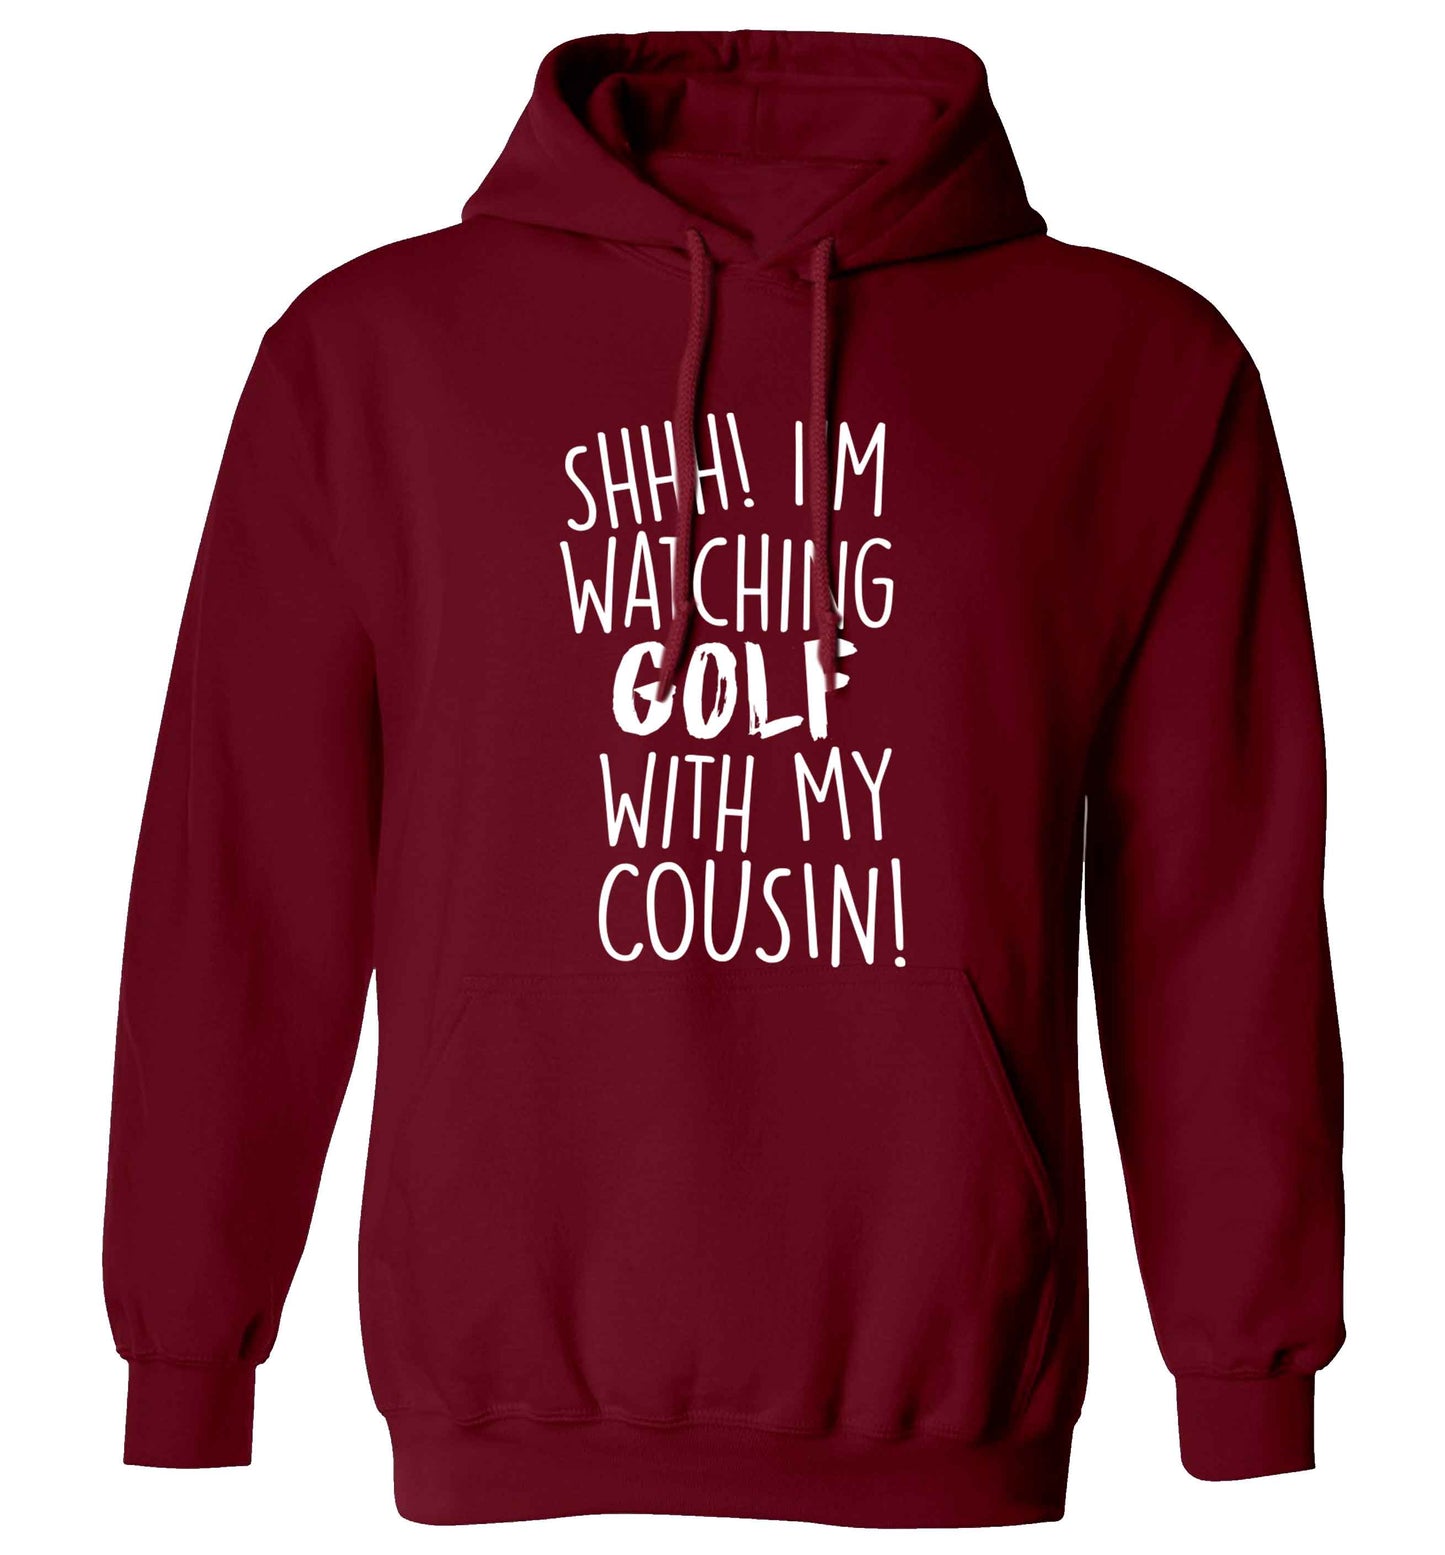 Shh I'm watching golf with my cousin adults unisex maroon hoodie 2XL